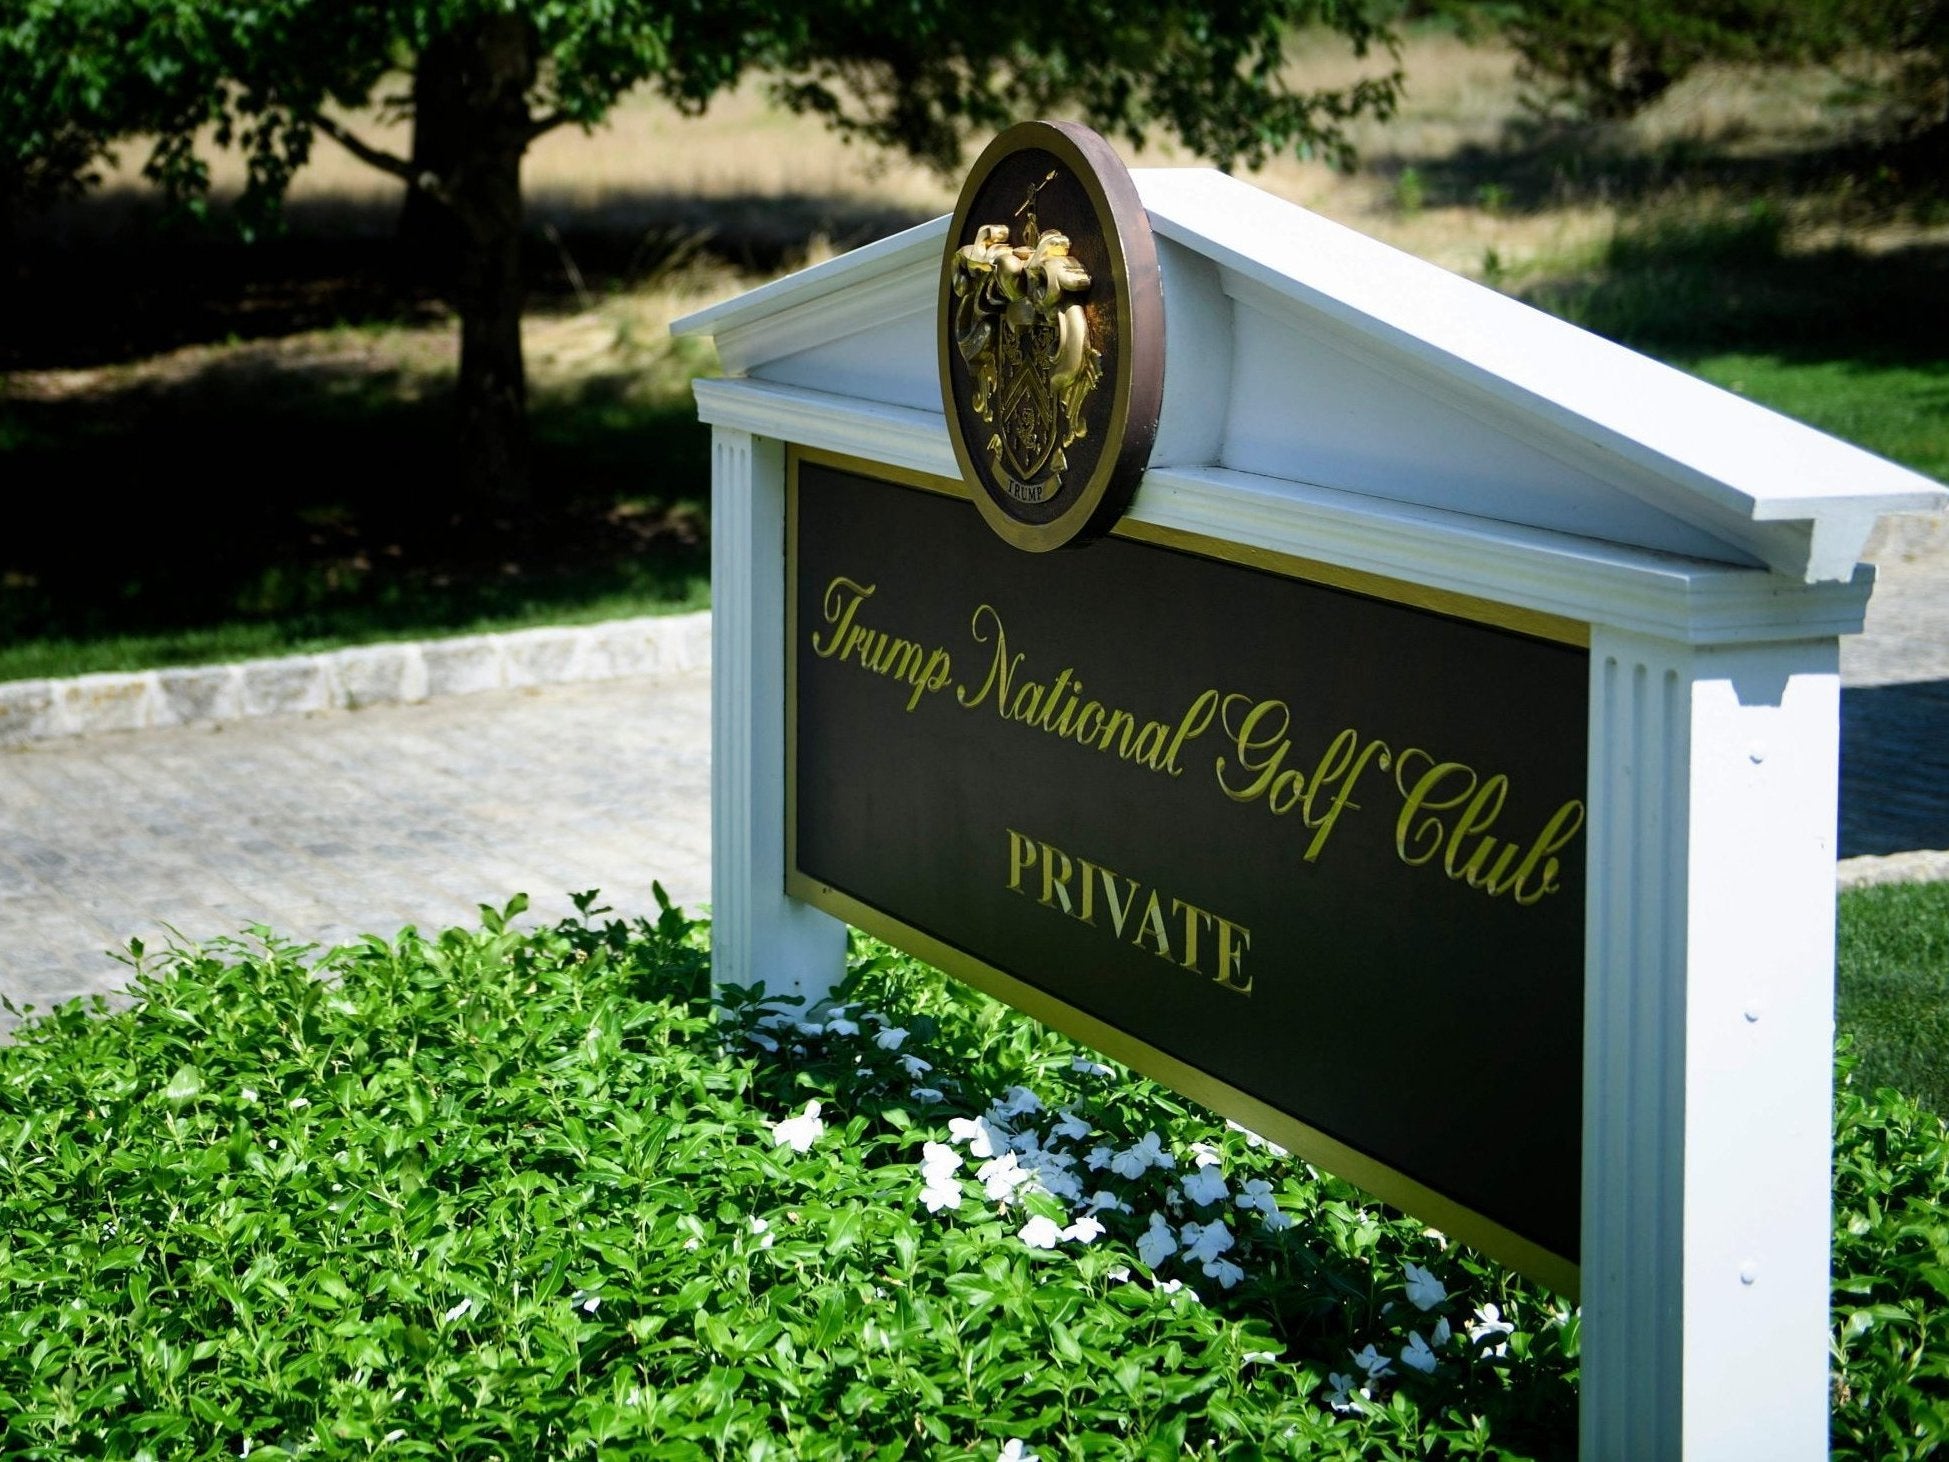 The spring 2017 meeting was held at the Bedminster golf course in New Jersey